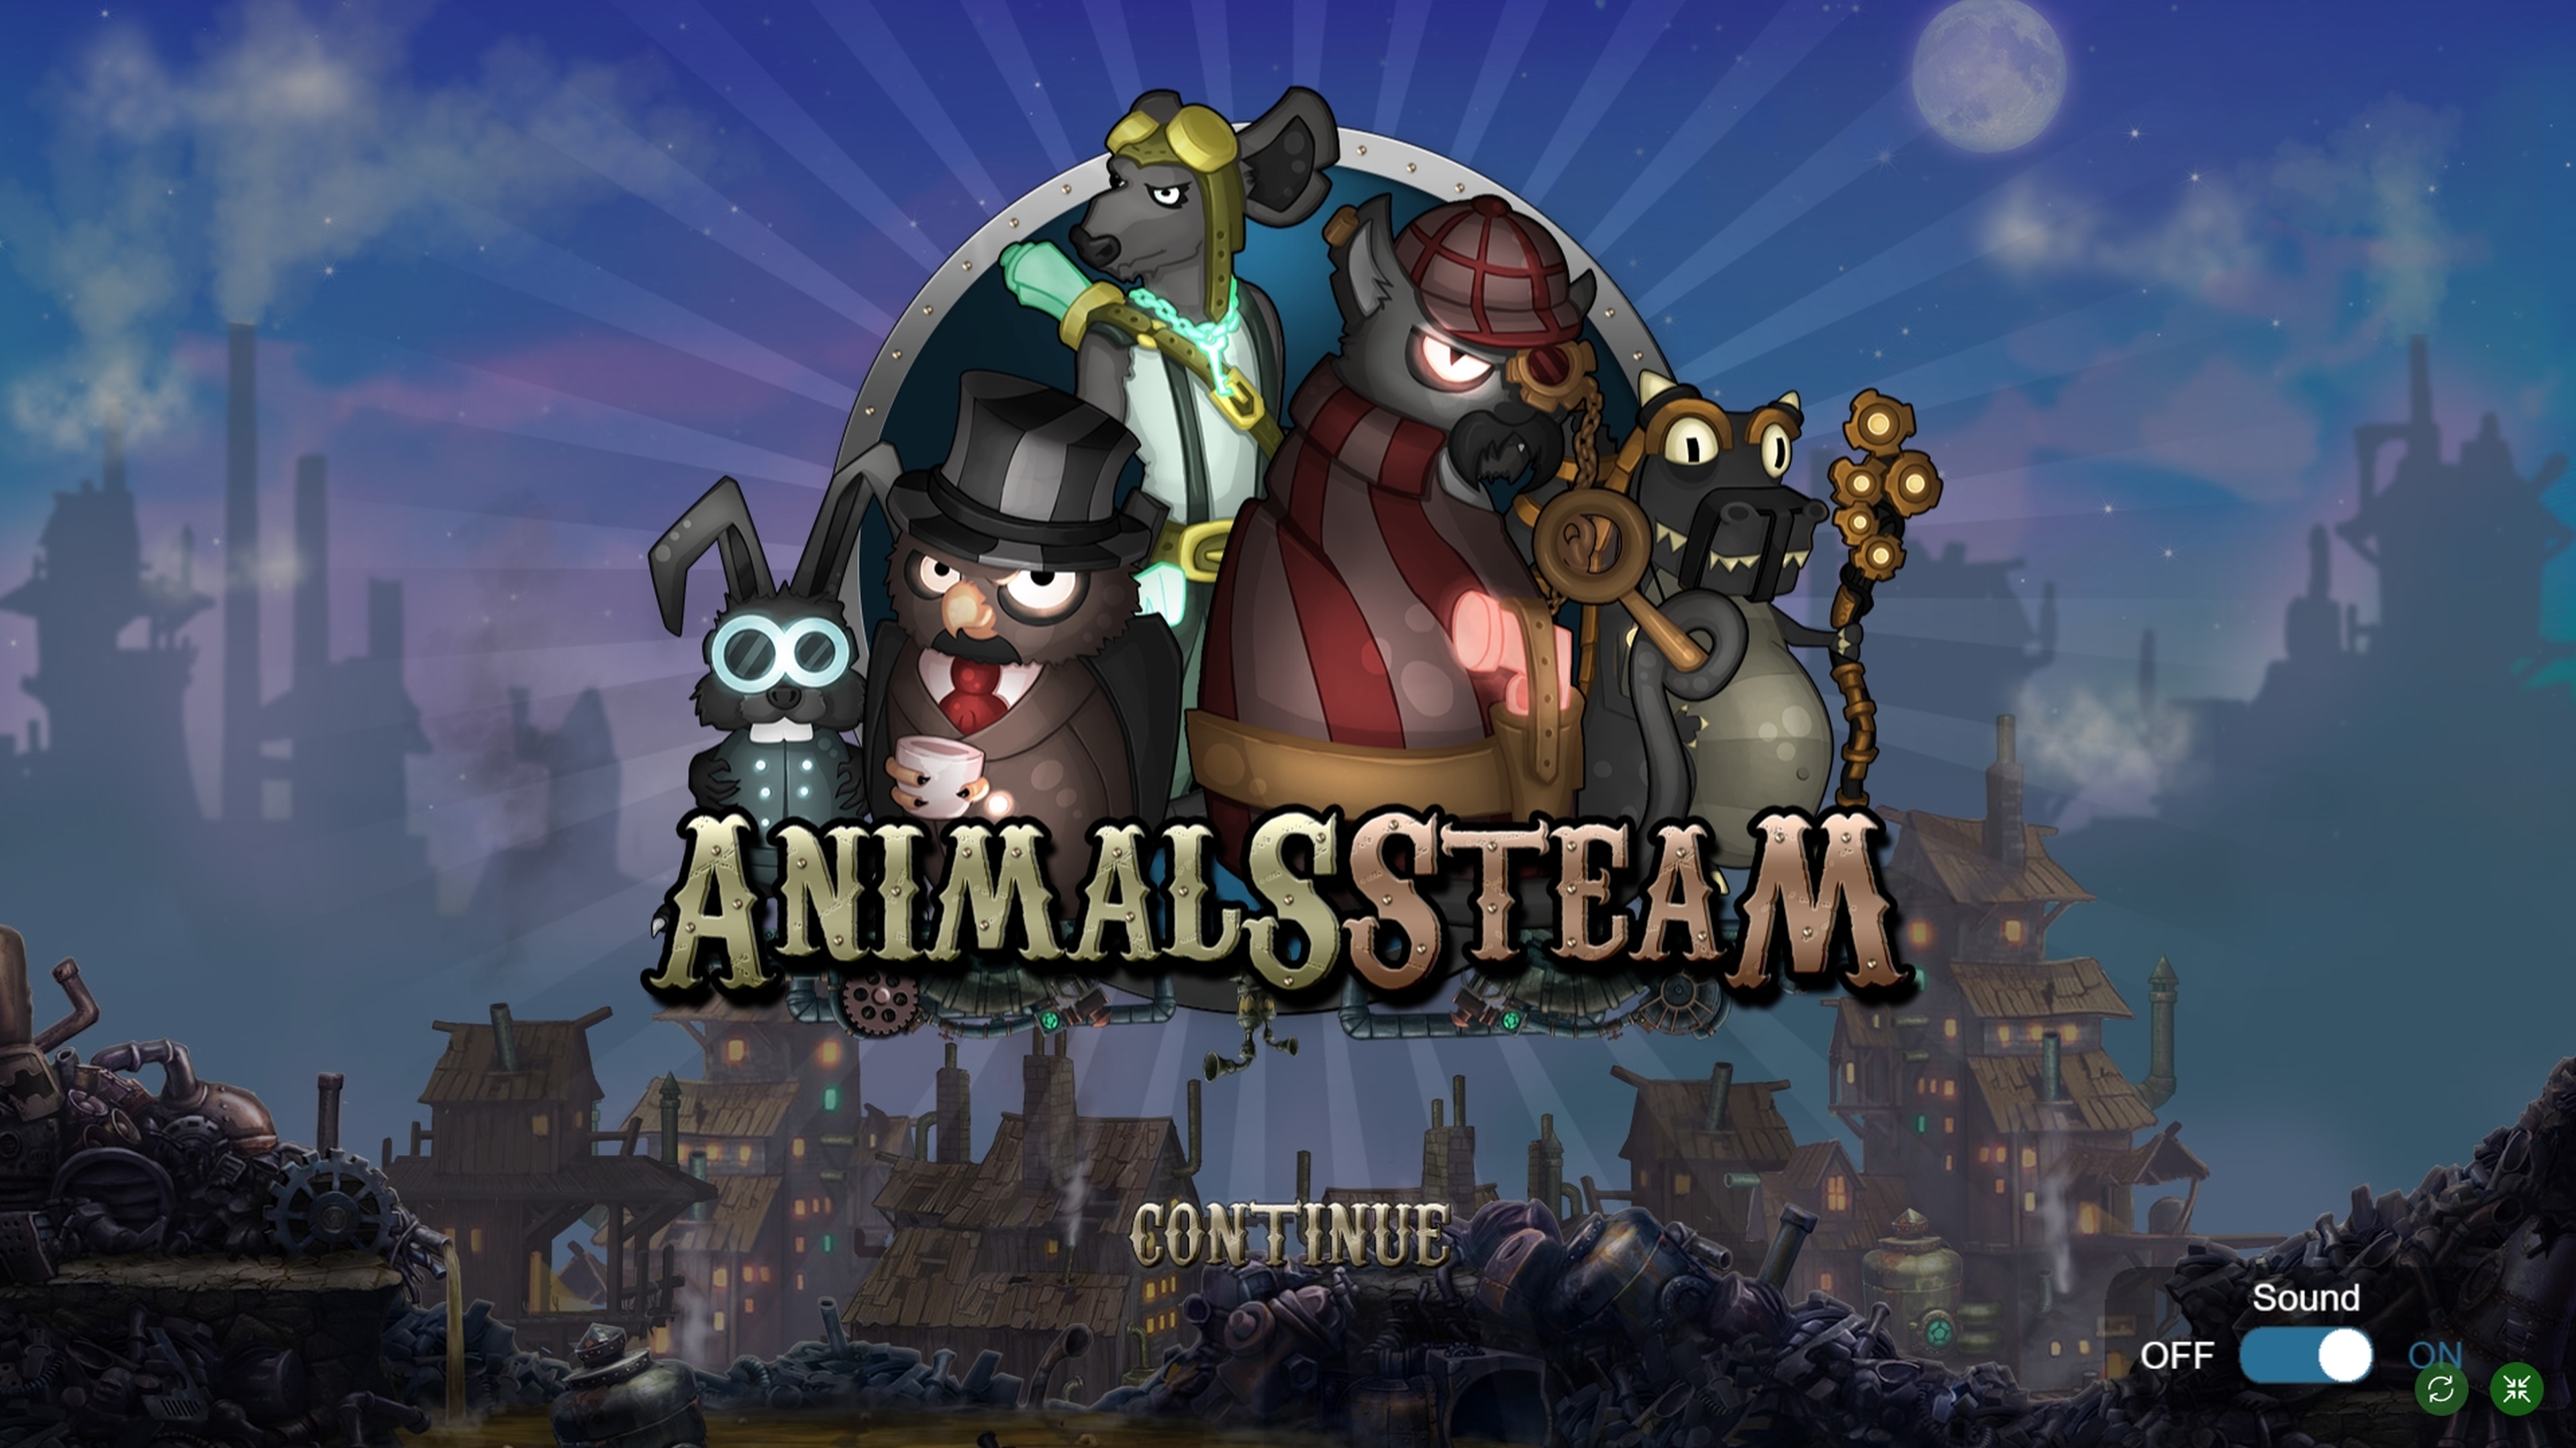 Play Animals Steam Free Casino Slot Game by Thunderspin